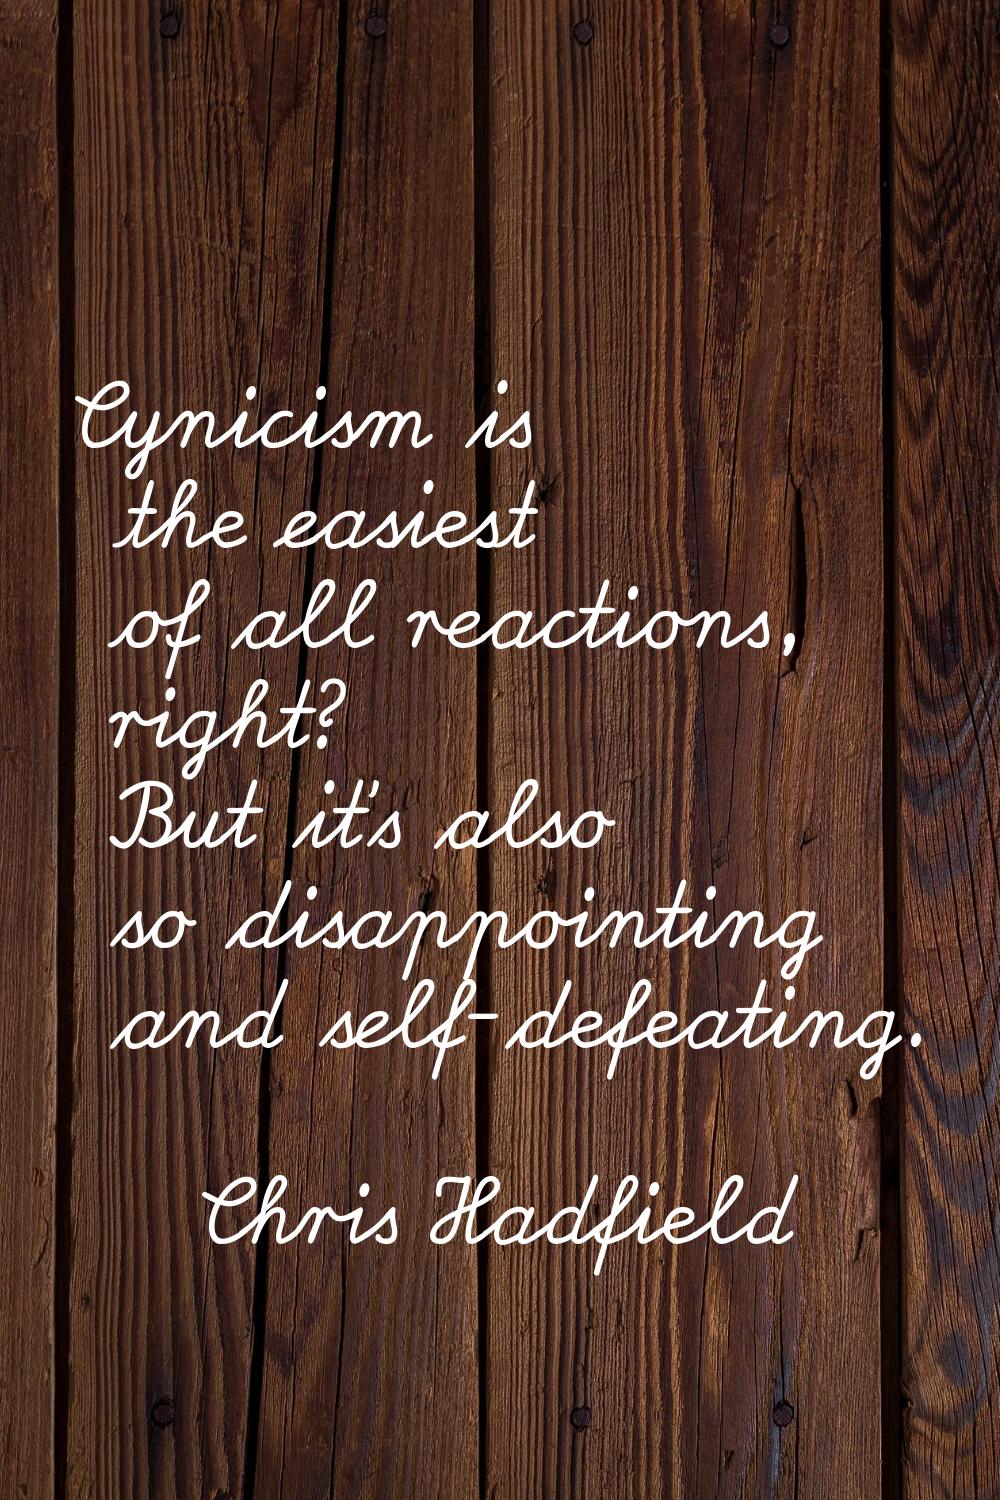 Cynicism is the easiest of all reactions, right? But it's also so disappointing and self-defeating.